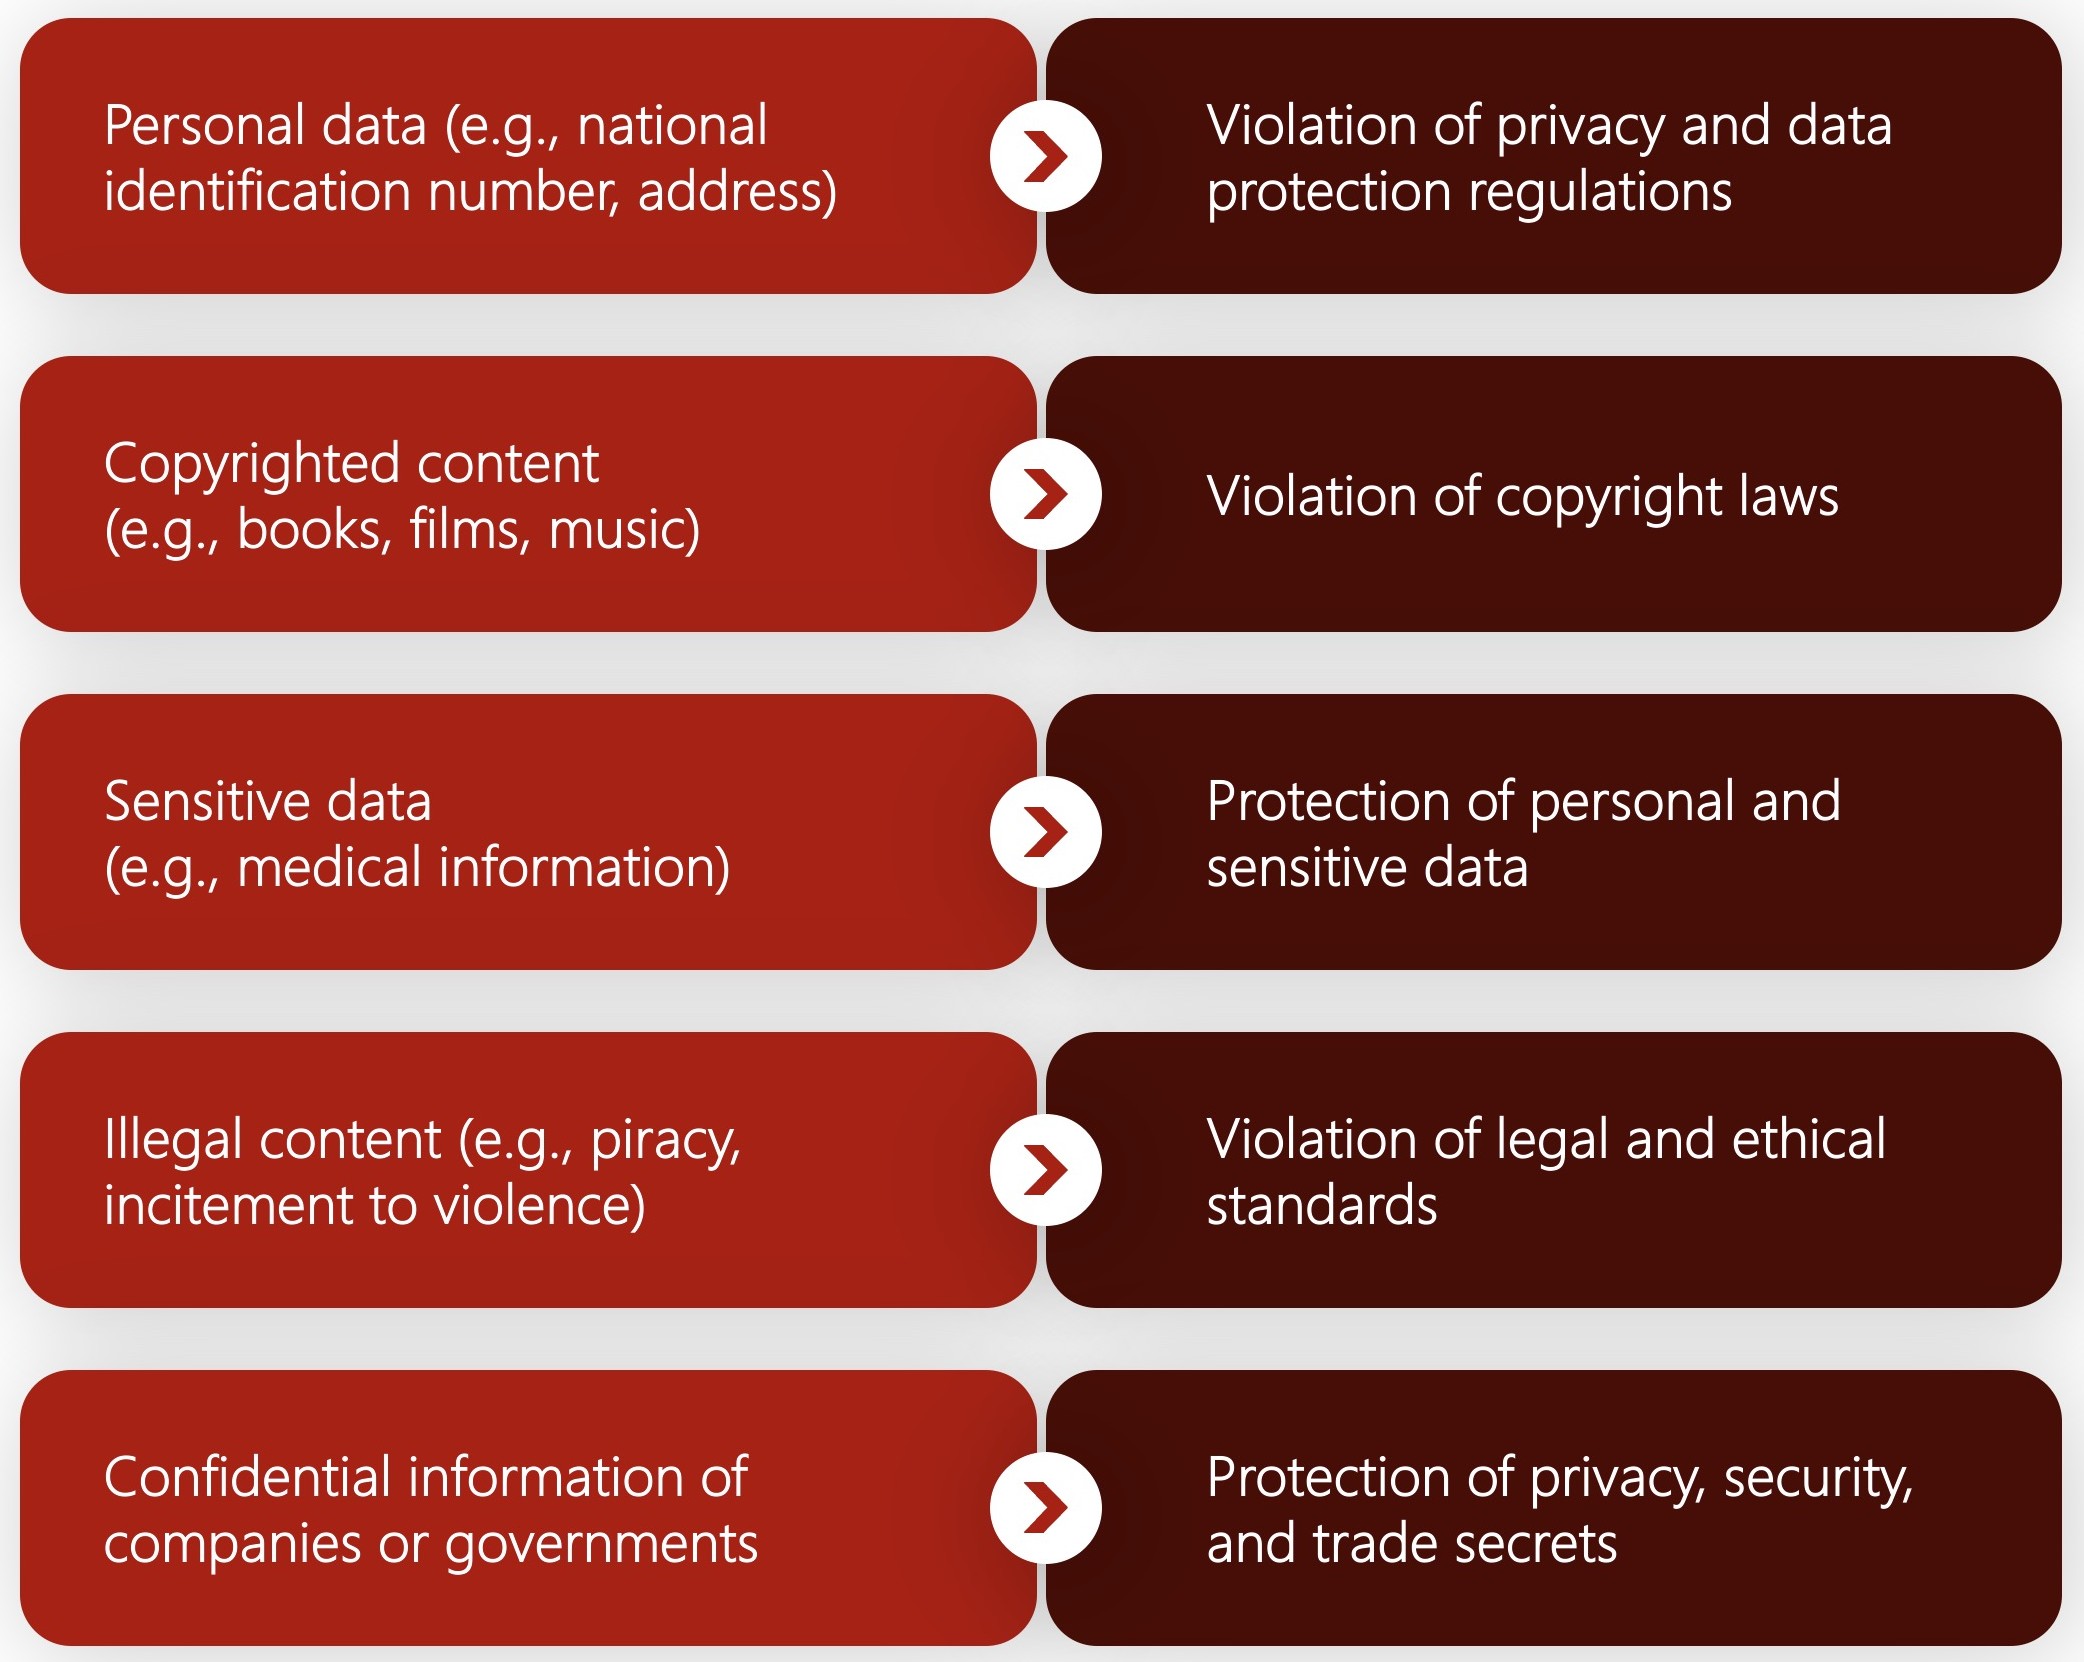 Categories of prohibited information and their legal implications